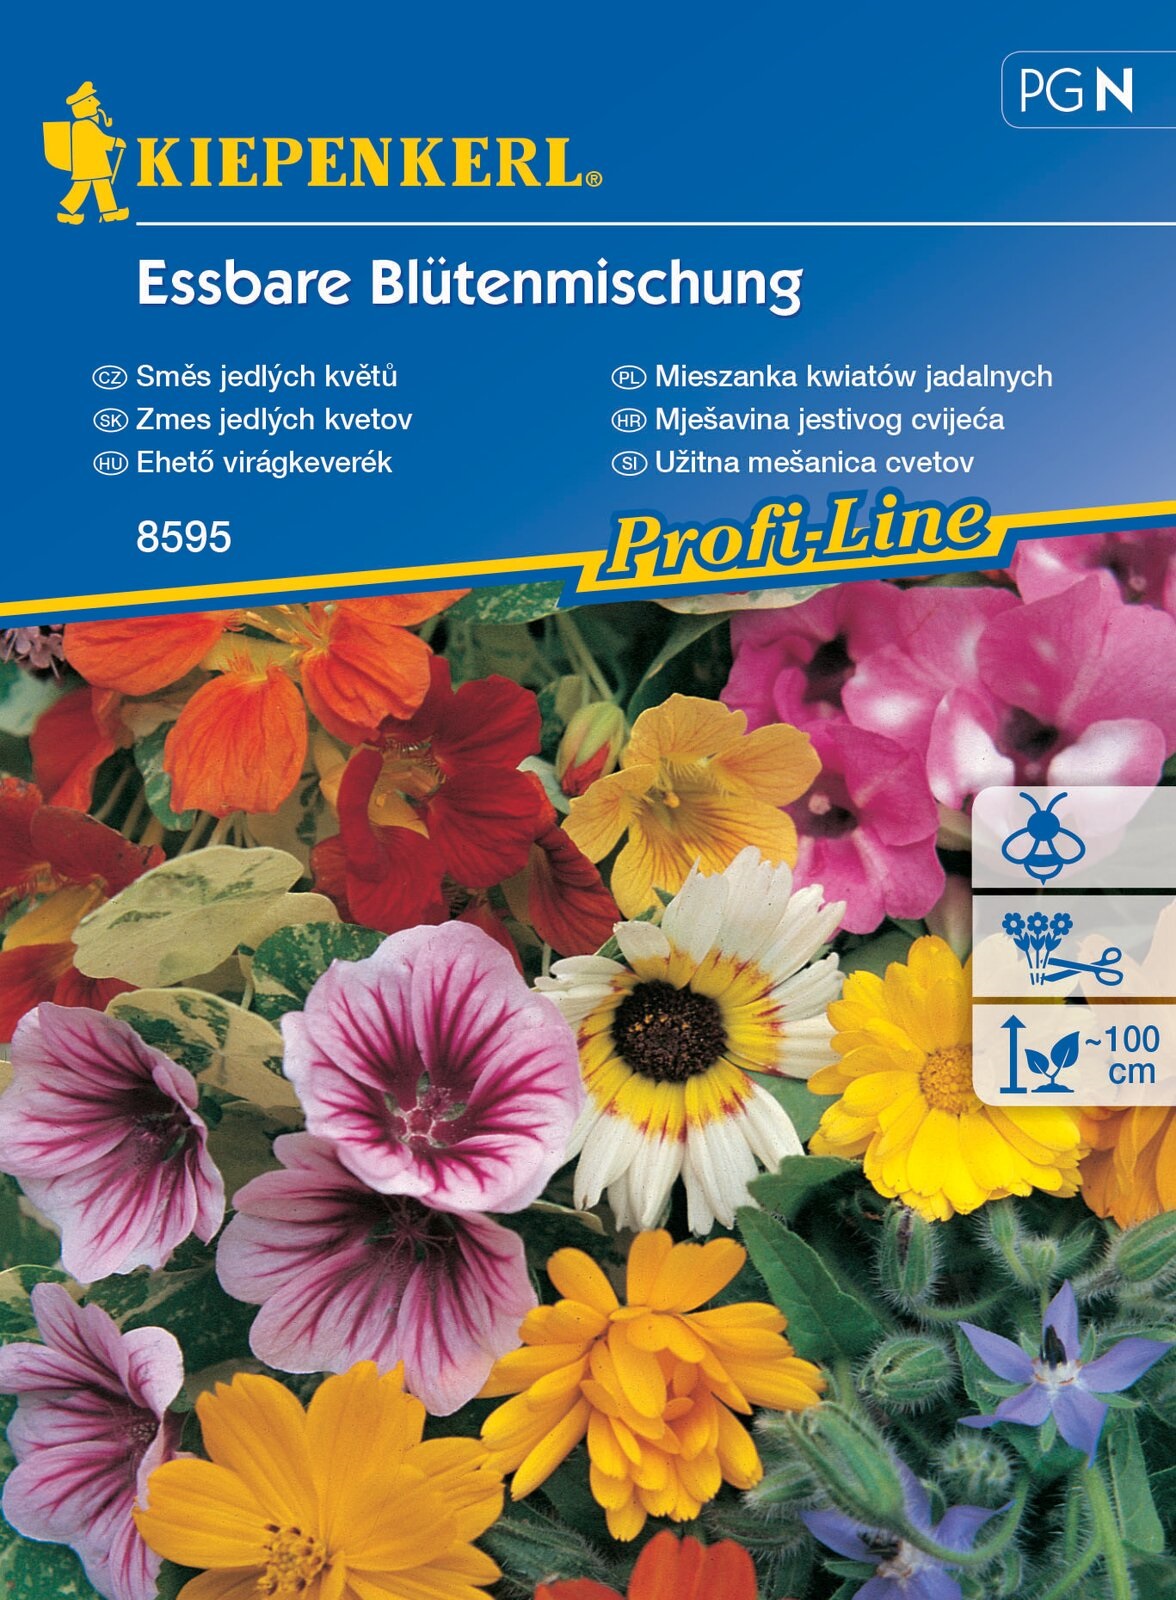 Edible flowers (annual seed mix) Kiepenkerl 2 m2